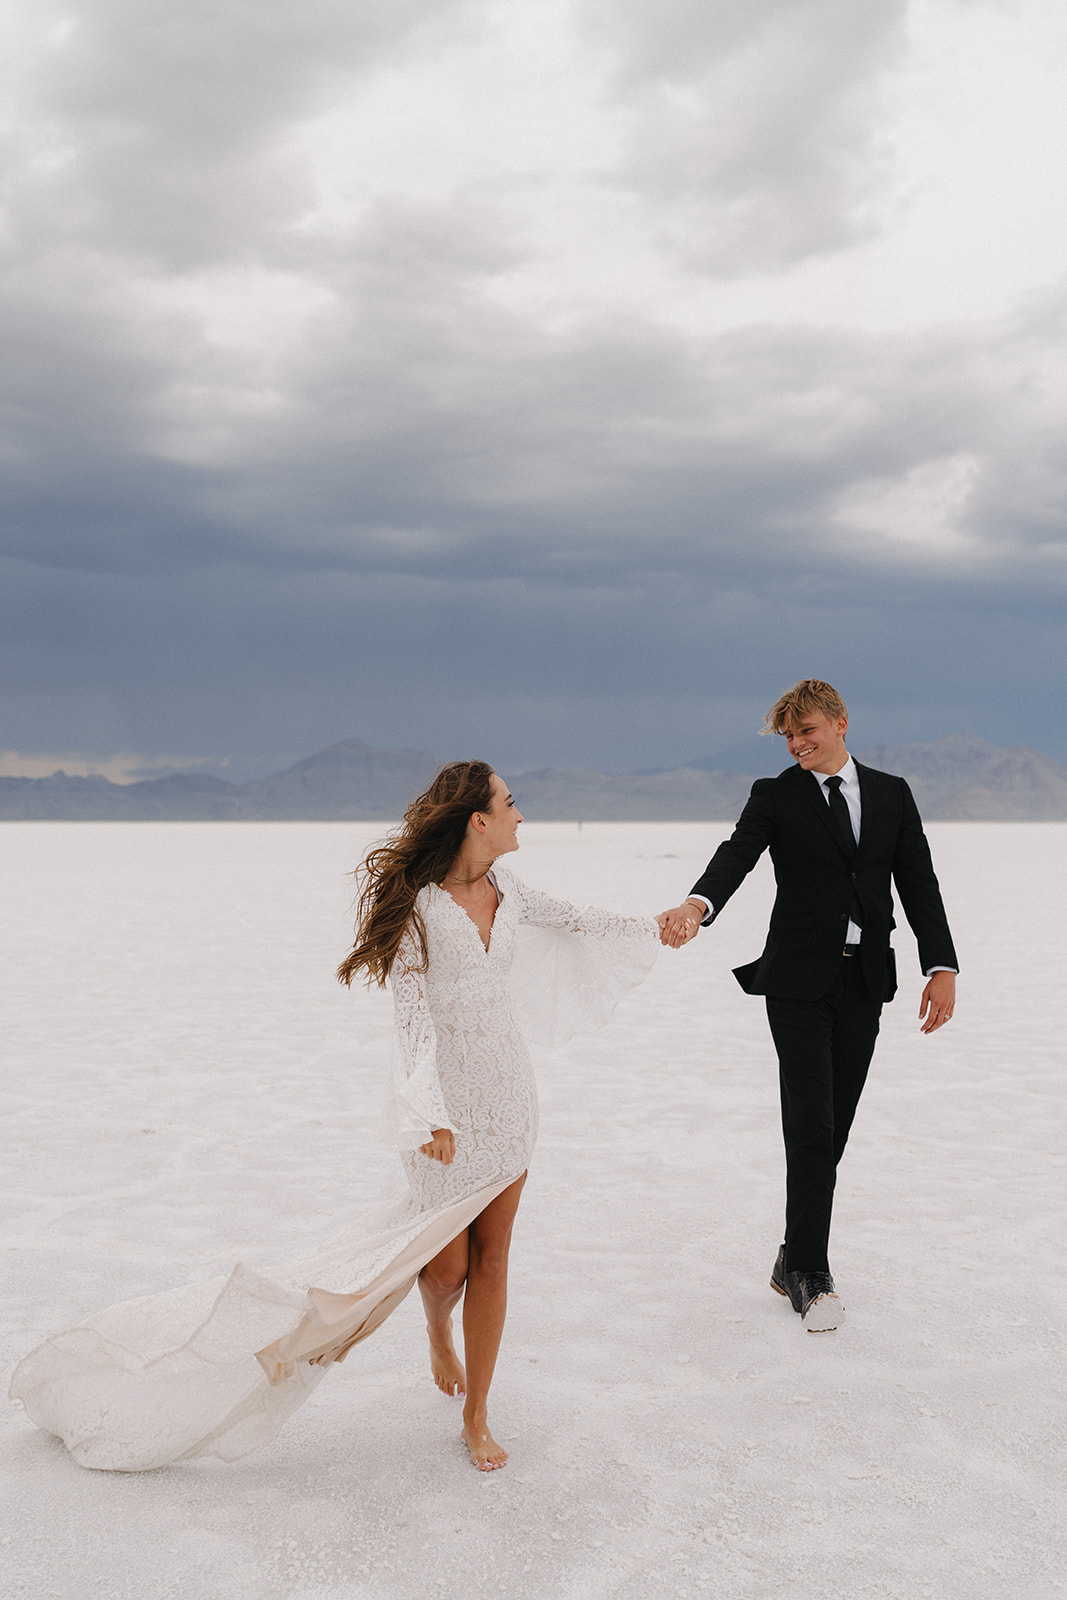 Newlyweds walk hand in hand through the Salt Flats in a black suit and white lace dress flowing in the wind during their Salt Flats Elopement